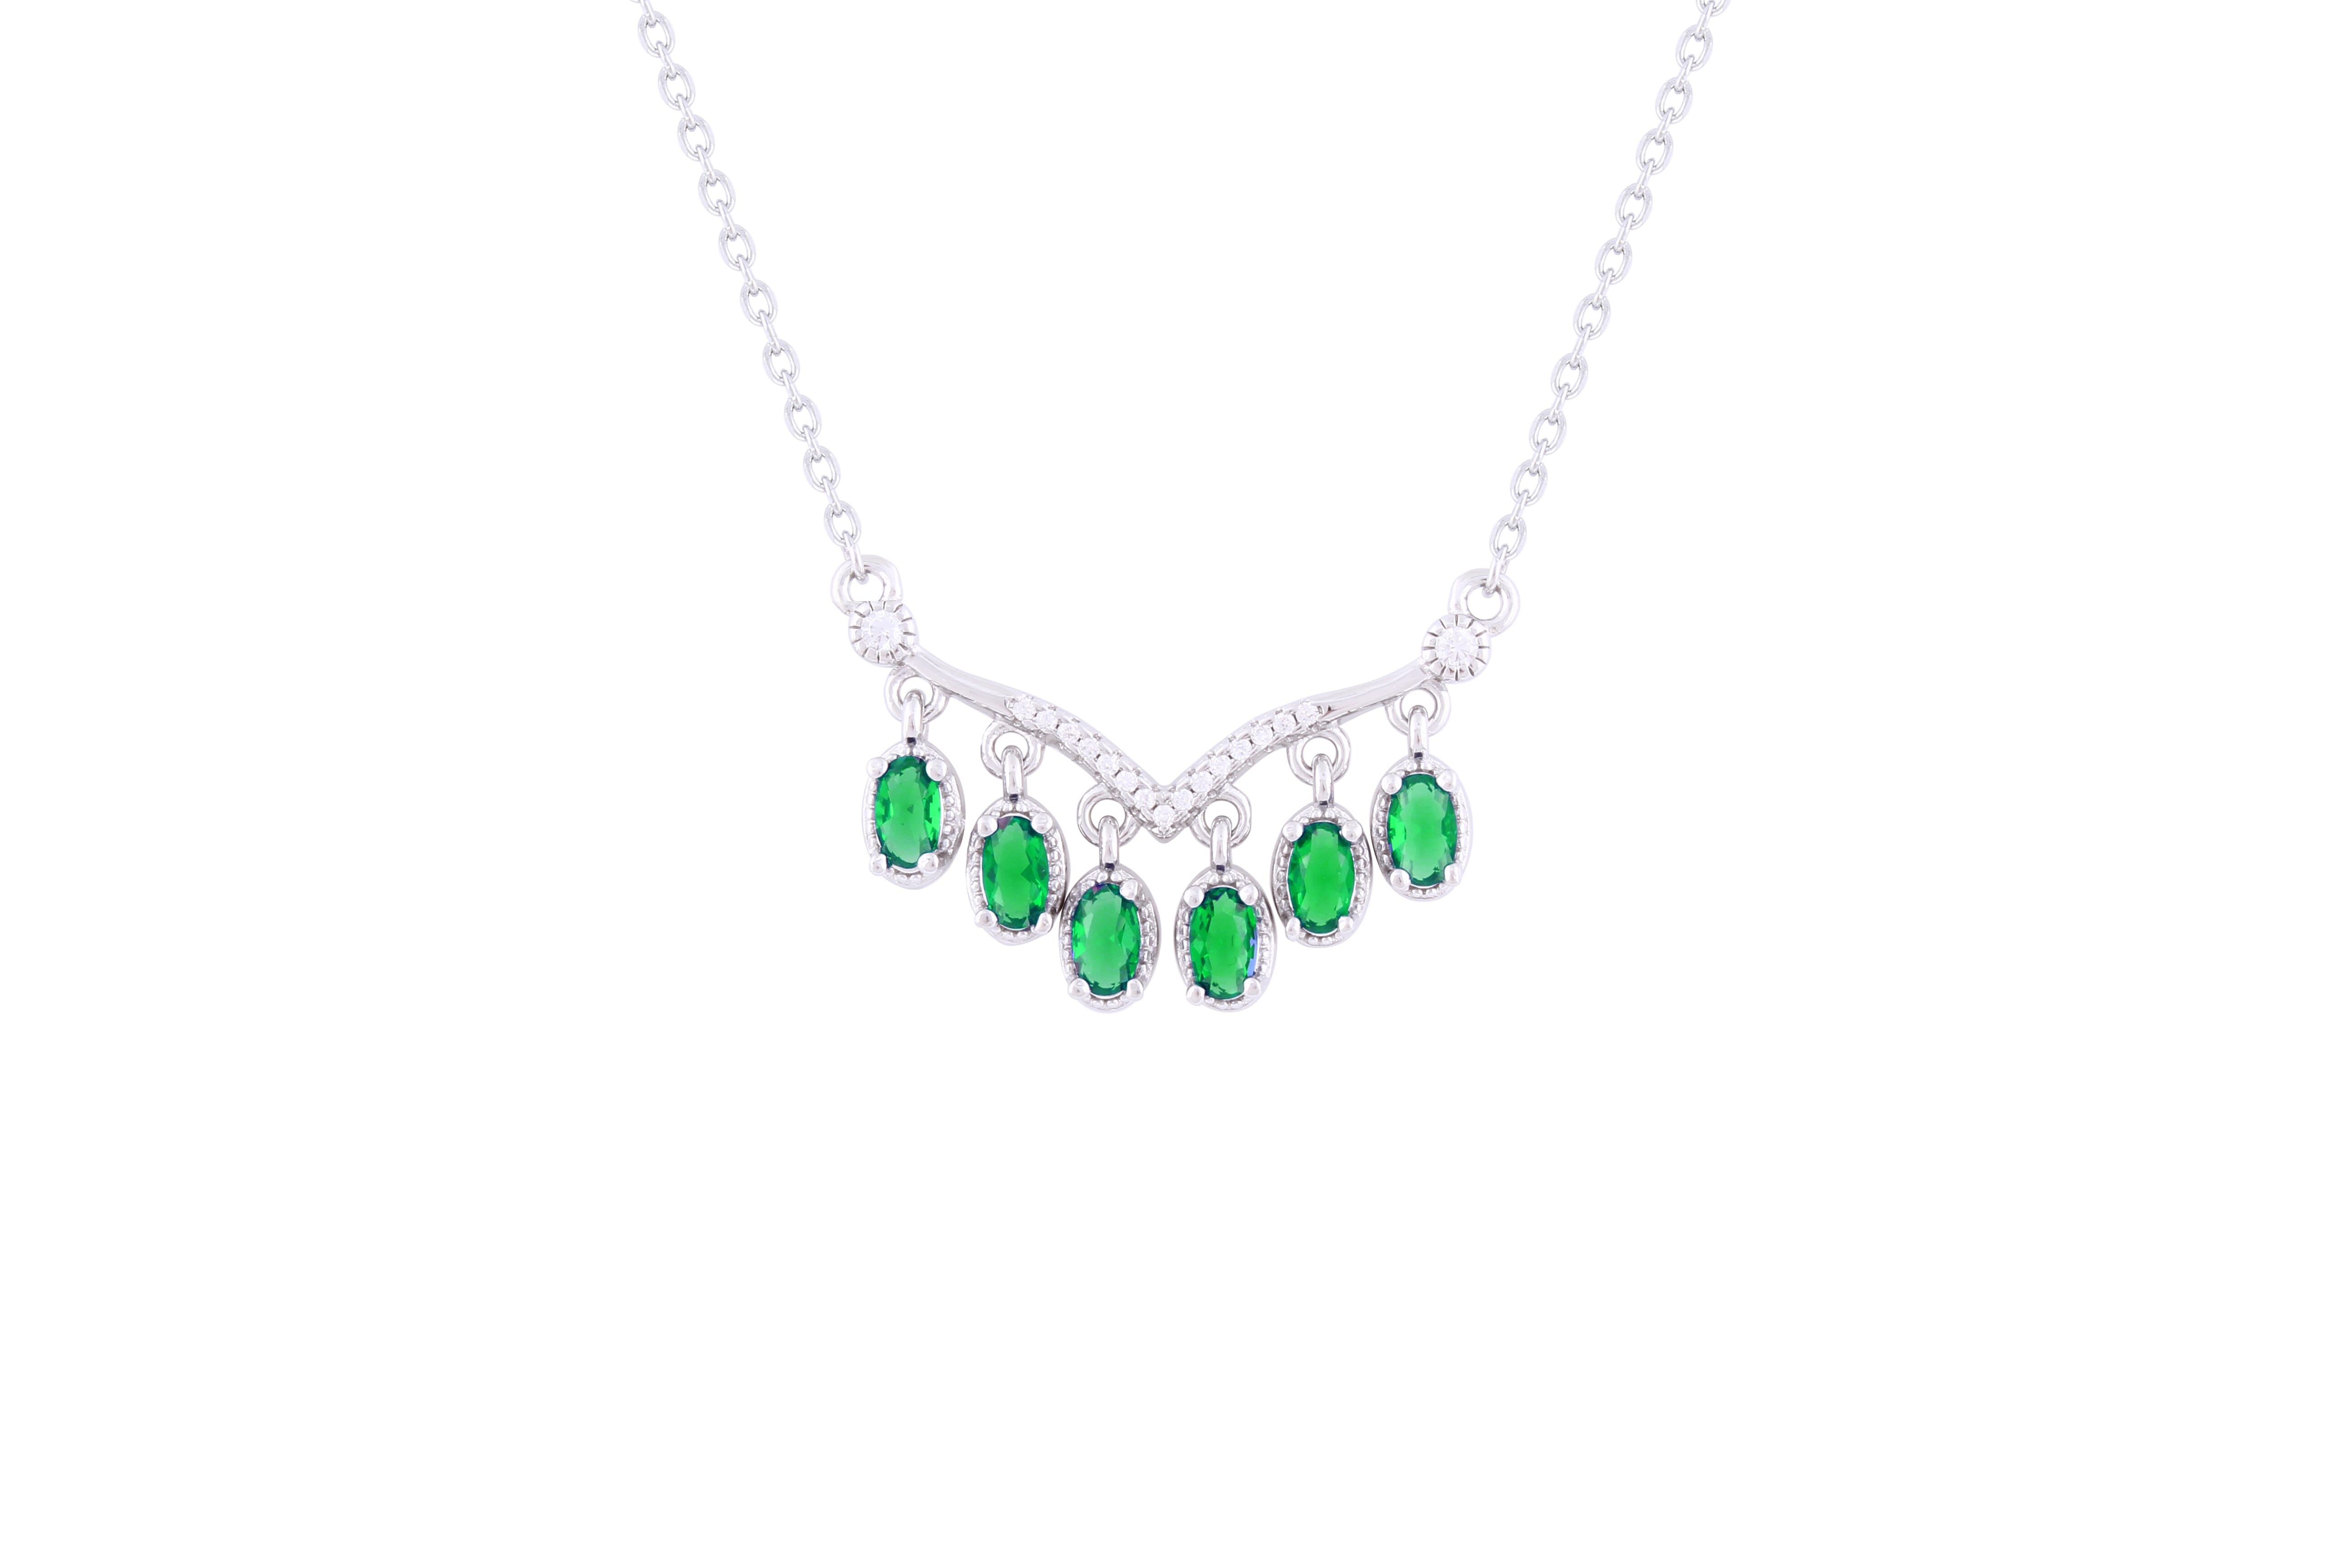 Asfour 925 Sterling Silver Necklace With Green Oval Cut Stones NR0495-G